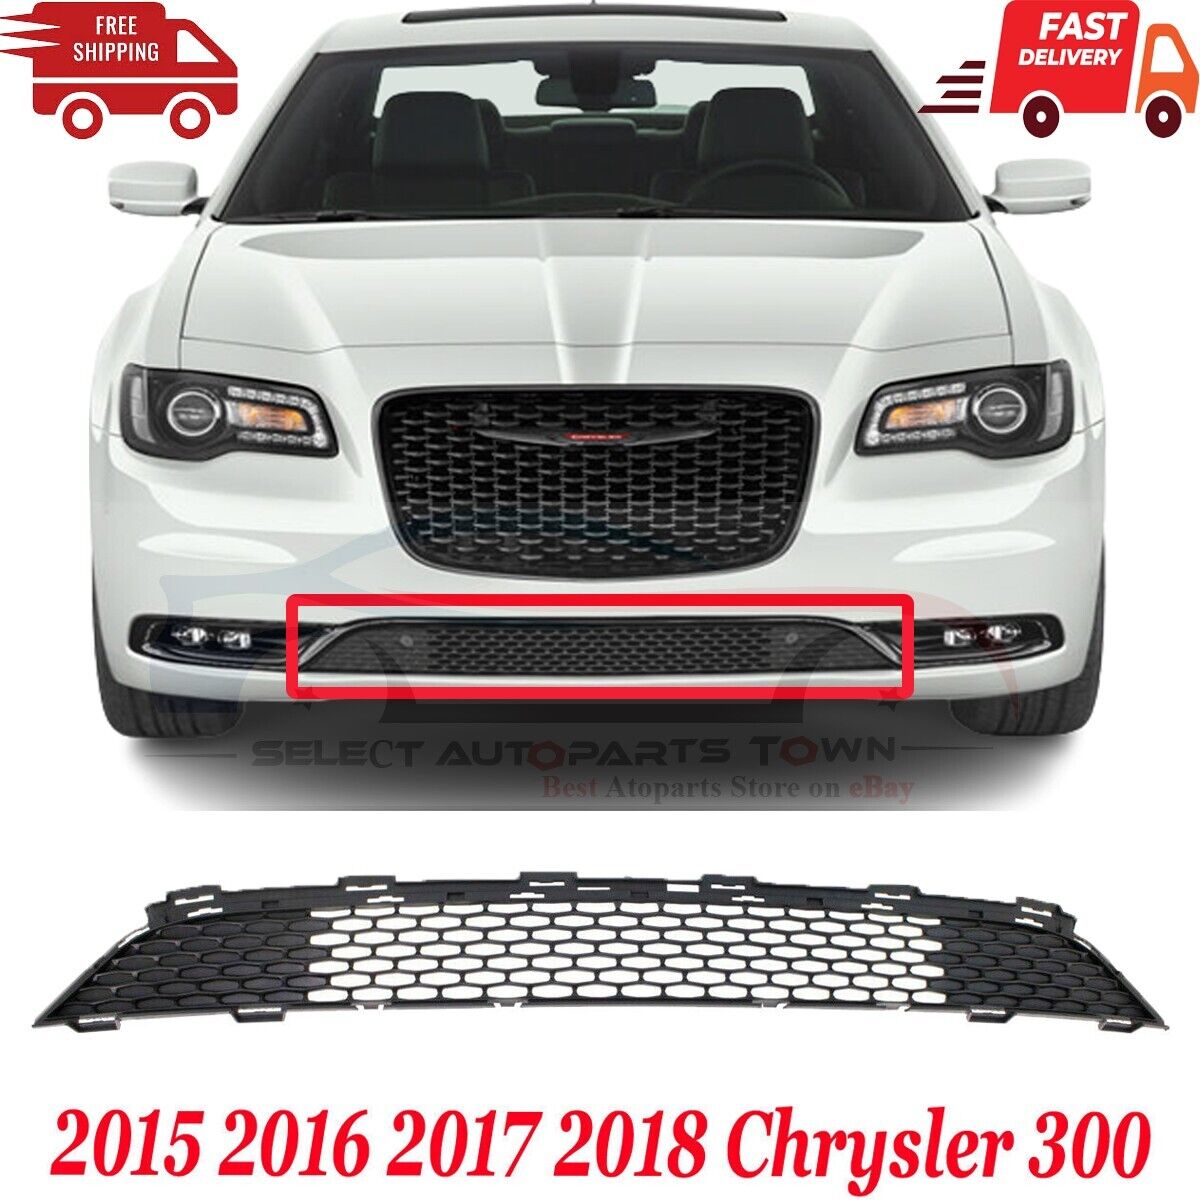 New Fits 2015 2016 2017 2018 Chrysler 300 Front Bumper Cover Grille CH1036142